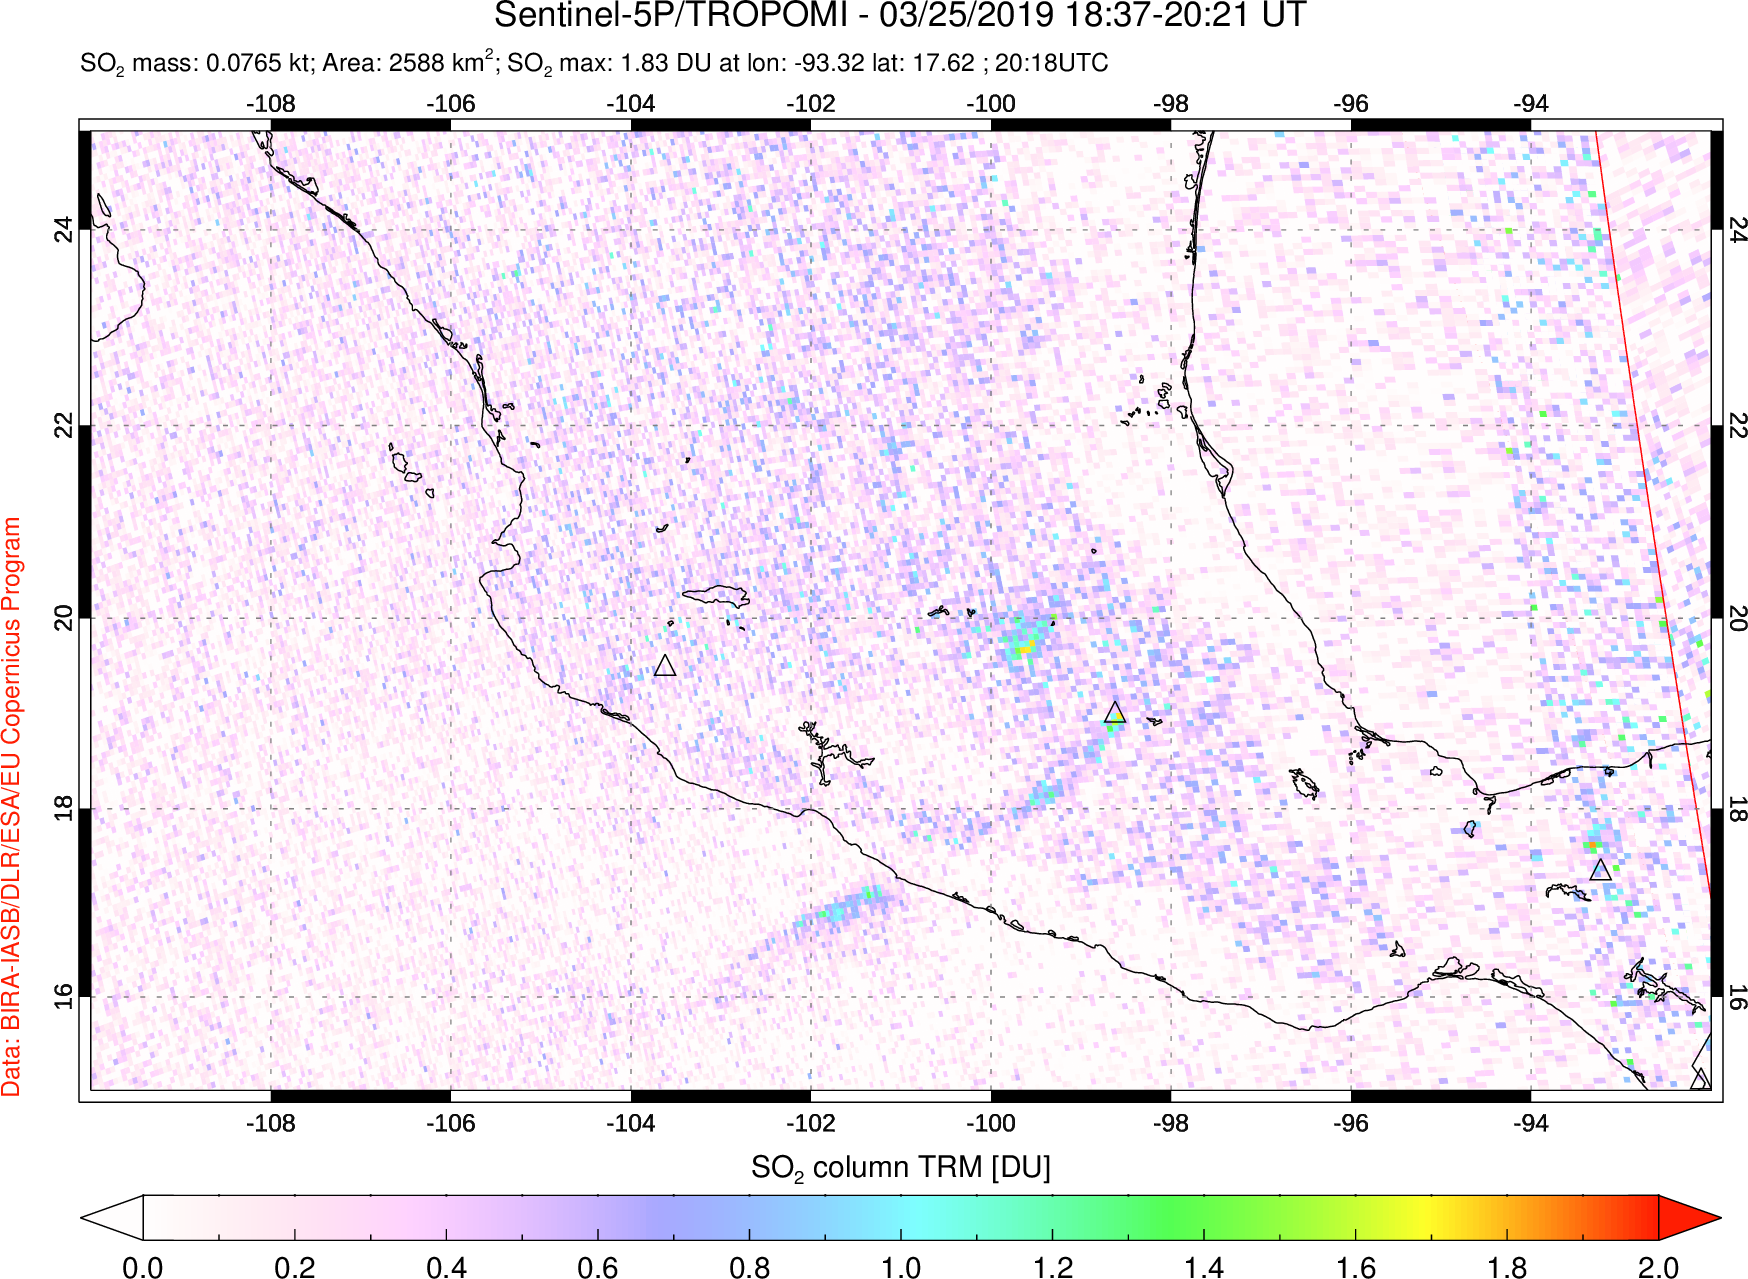 A sulfur dioxide image over Mexico on Mar 25, 2019.